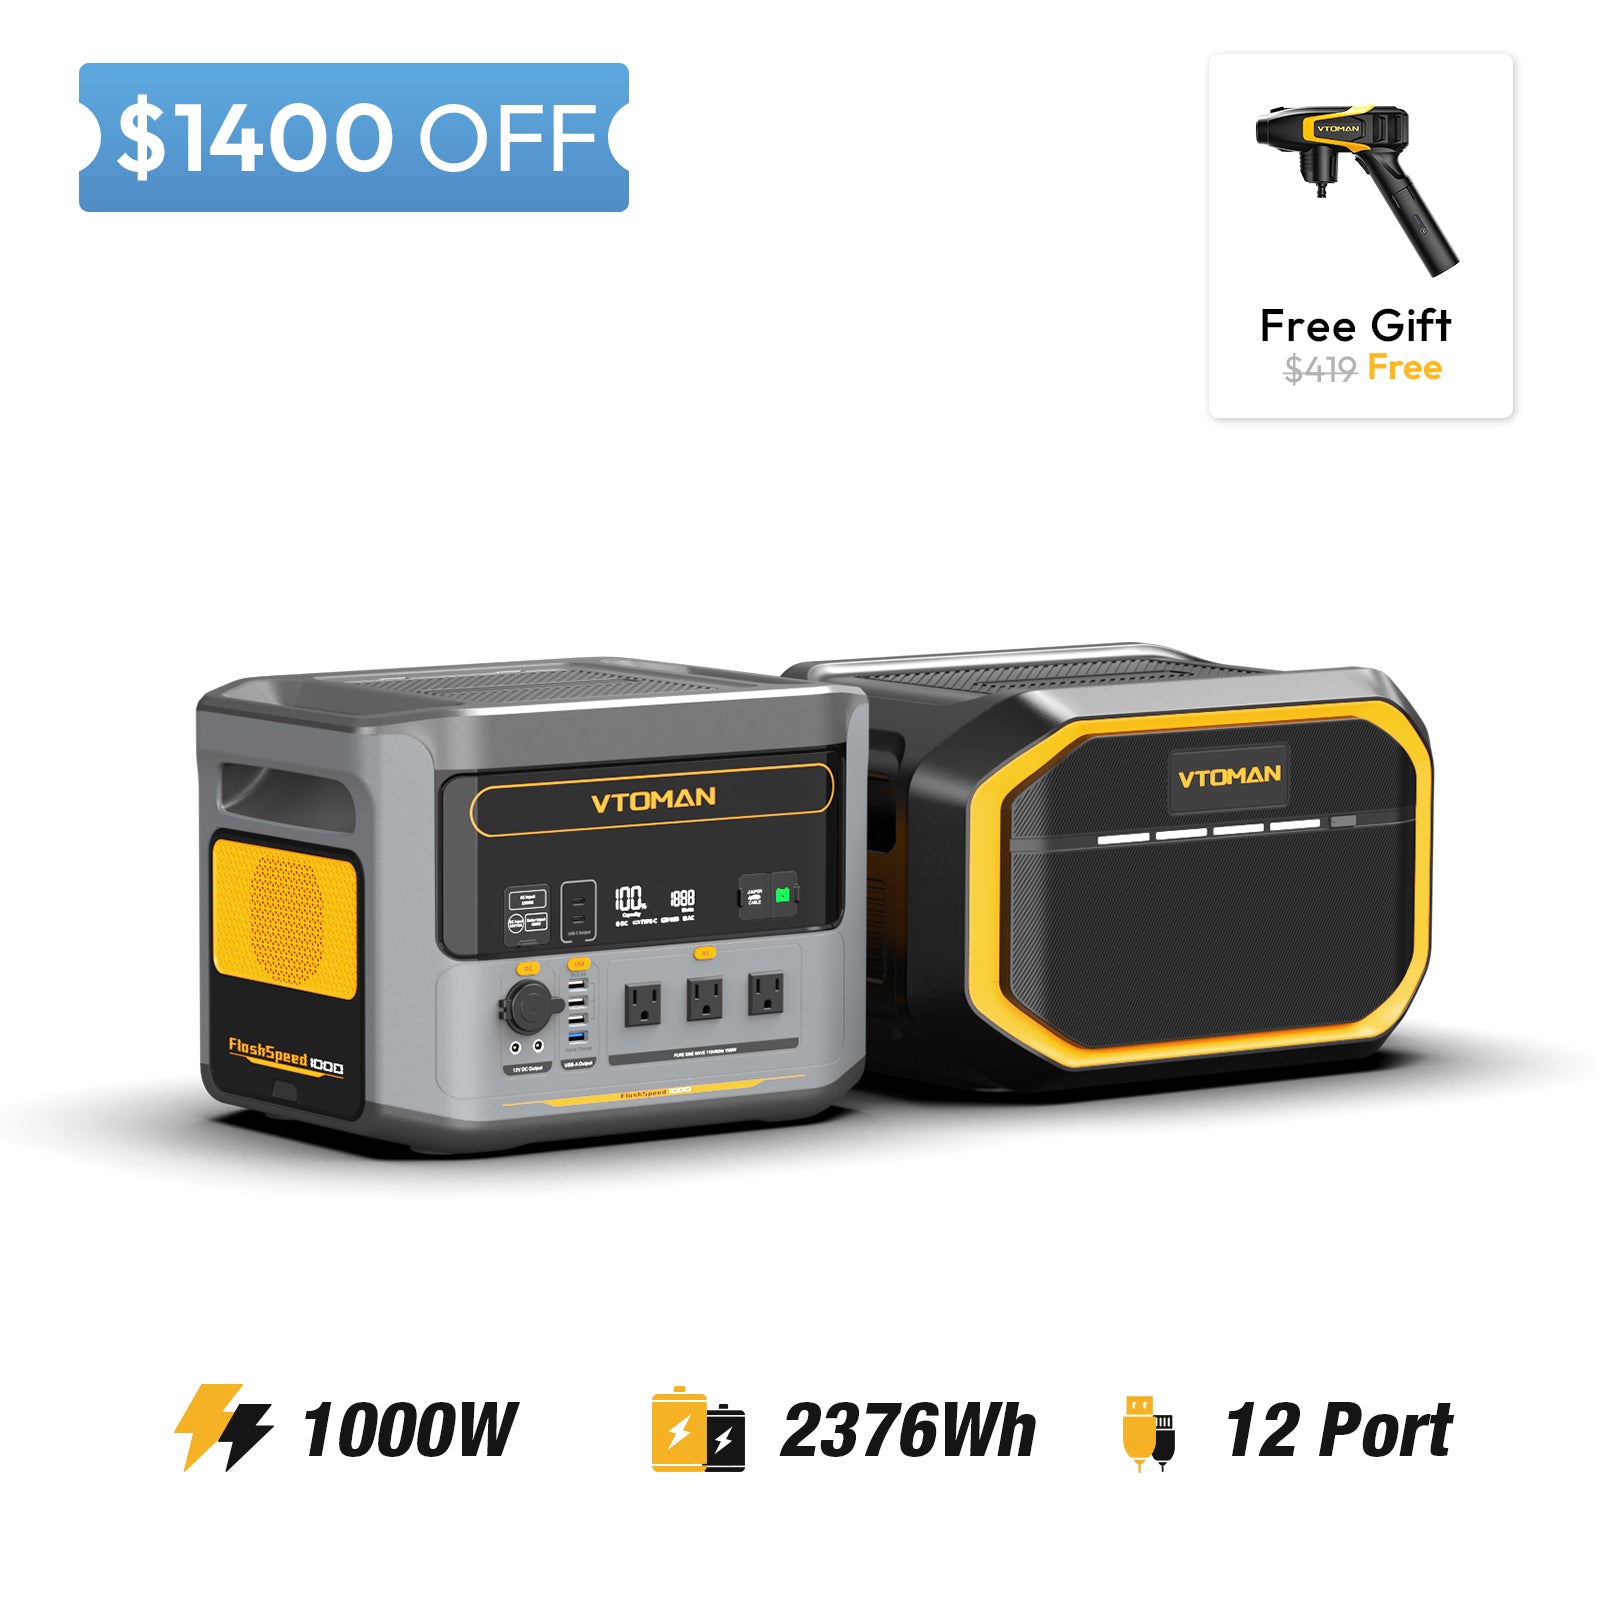 FlashSpeed 1000 and 1548wh extra battery save $1400 in summer sale